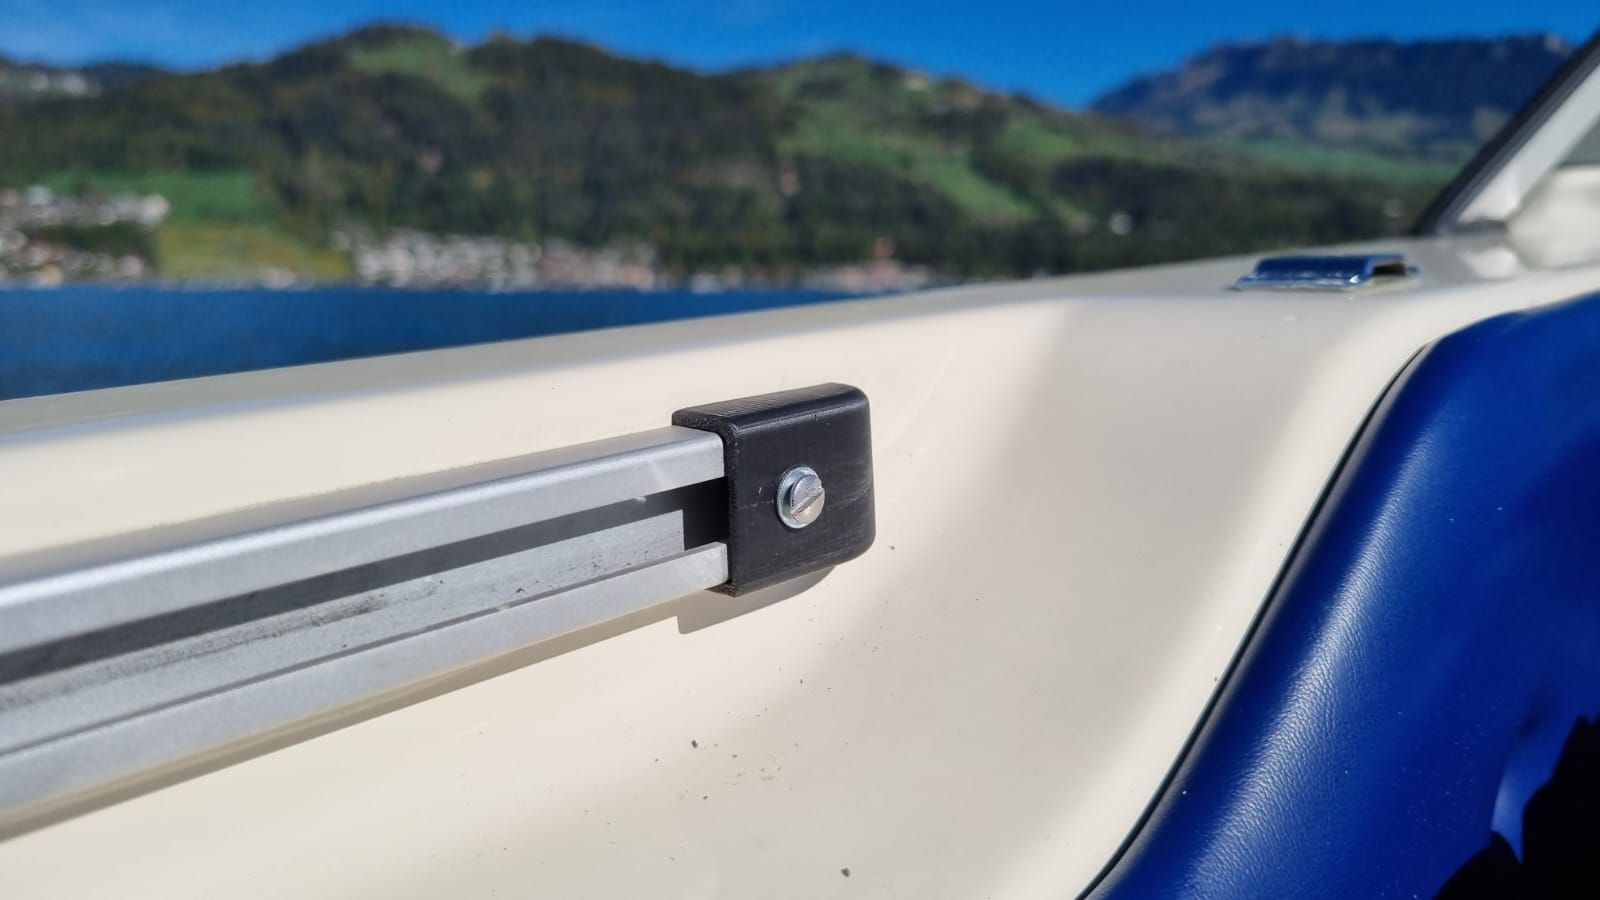 Replacement C rail cover for Fiberline g148 SE (Boat)